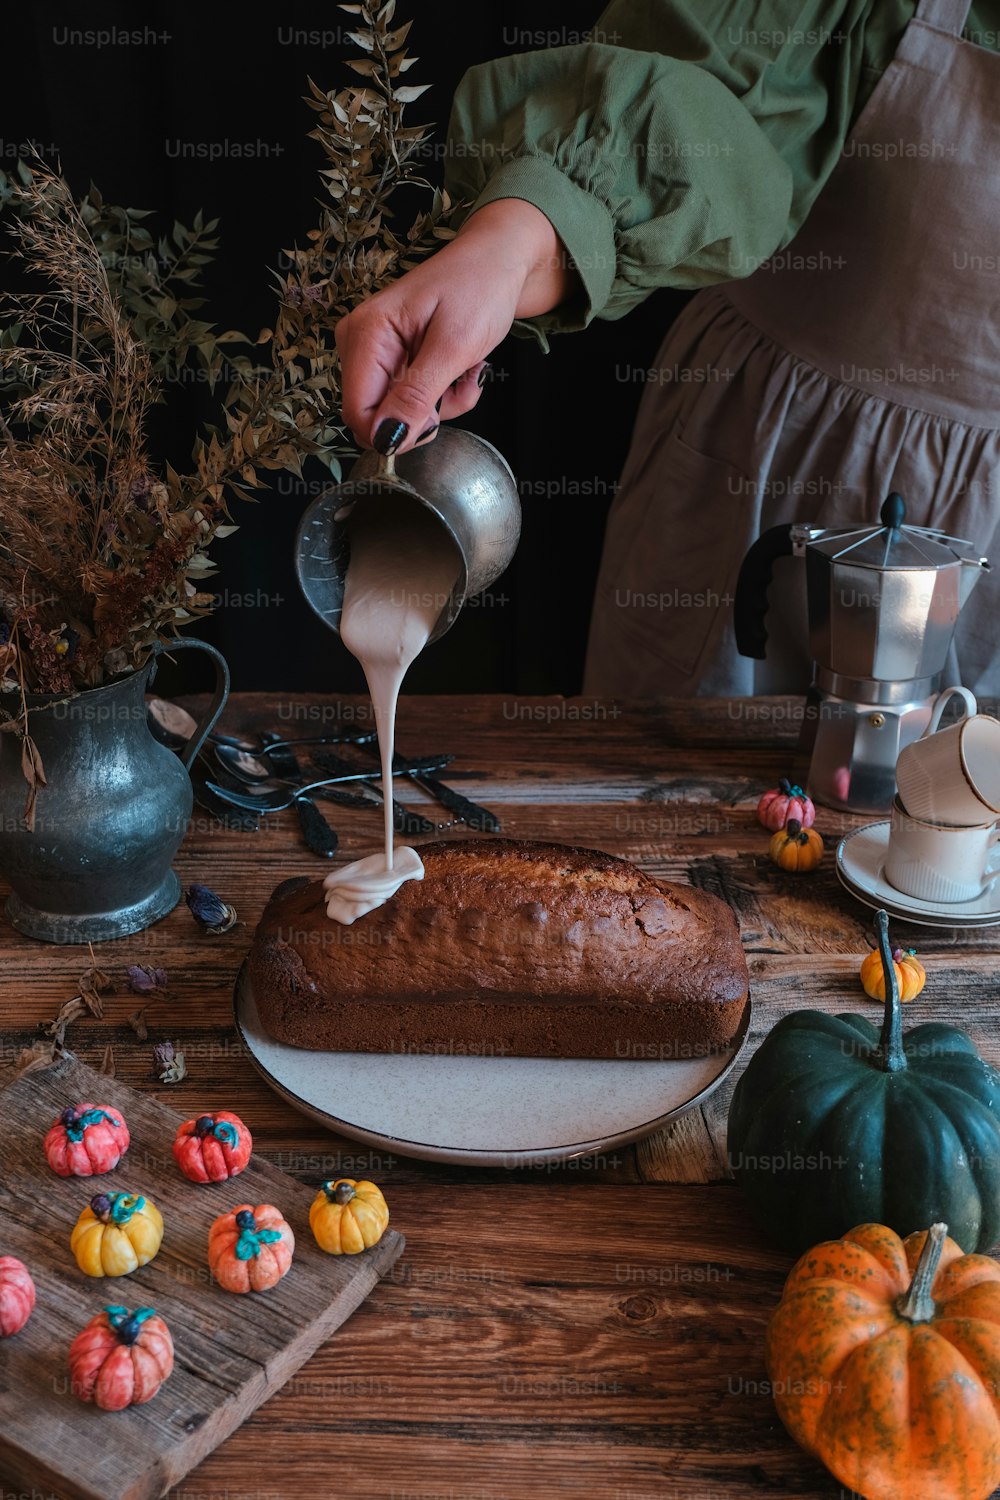 a person pouring sugar on a cake on a table